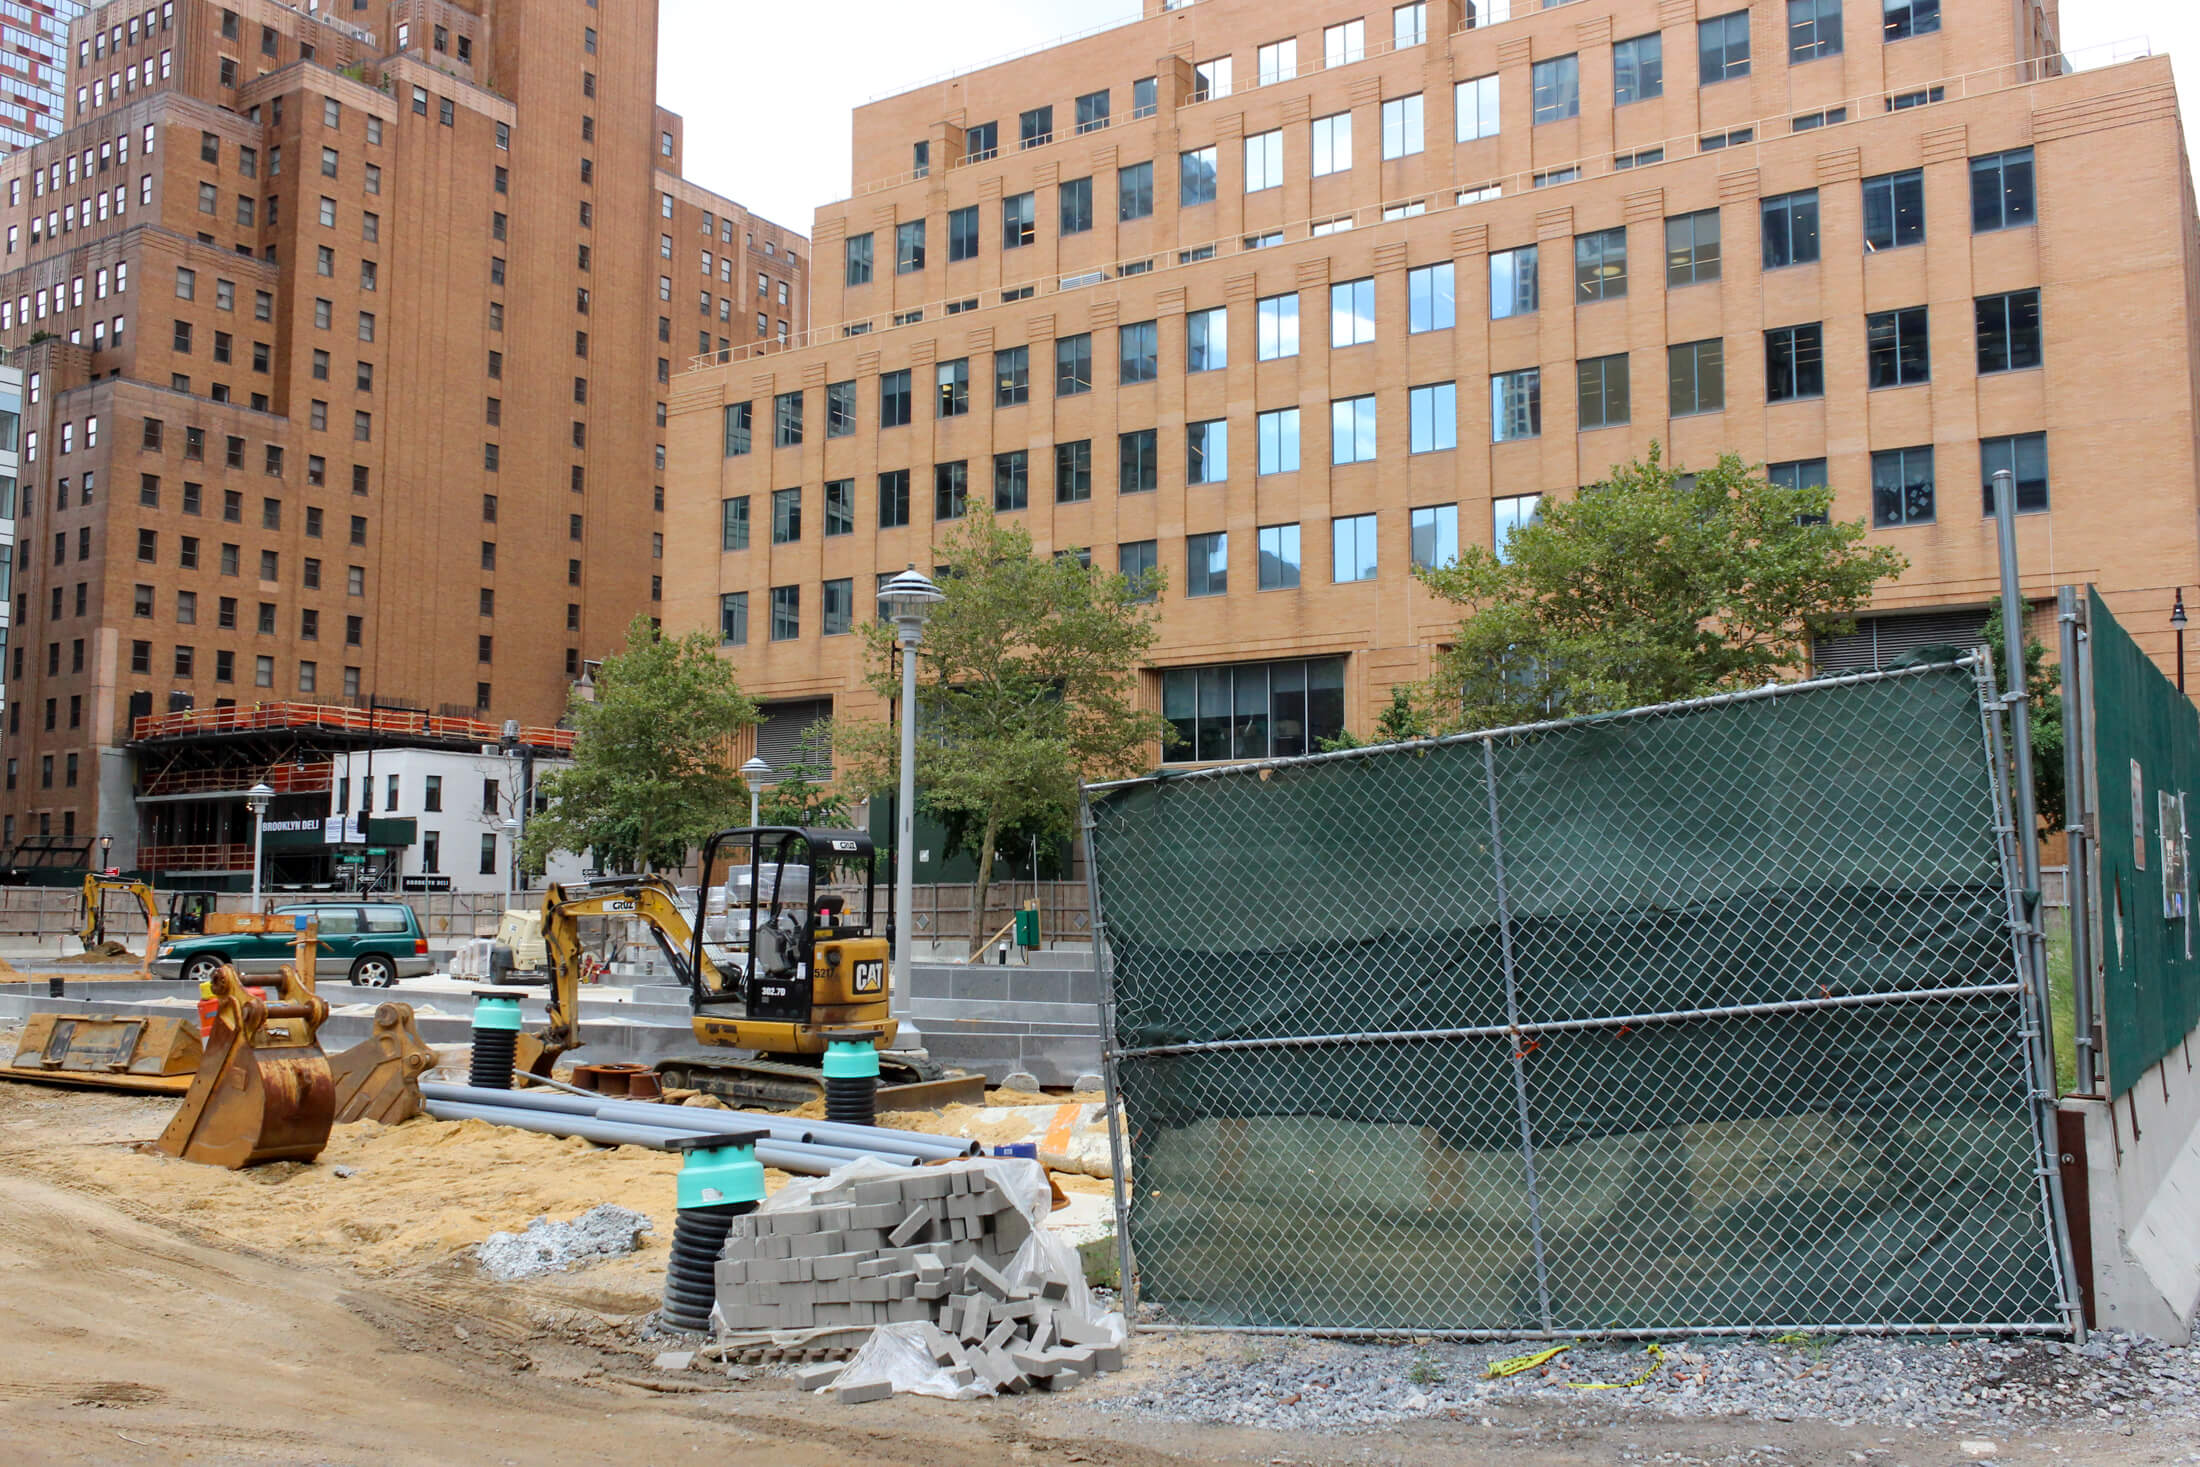 view from albee square towards willoughby showing piles of construction material